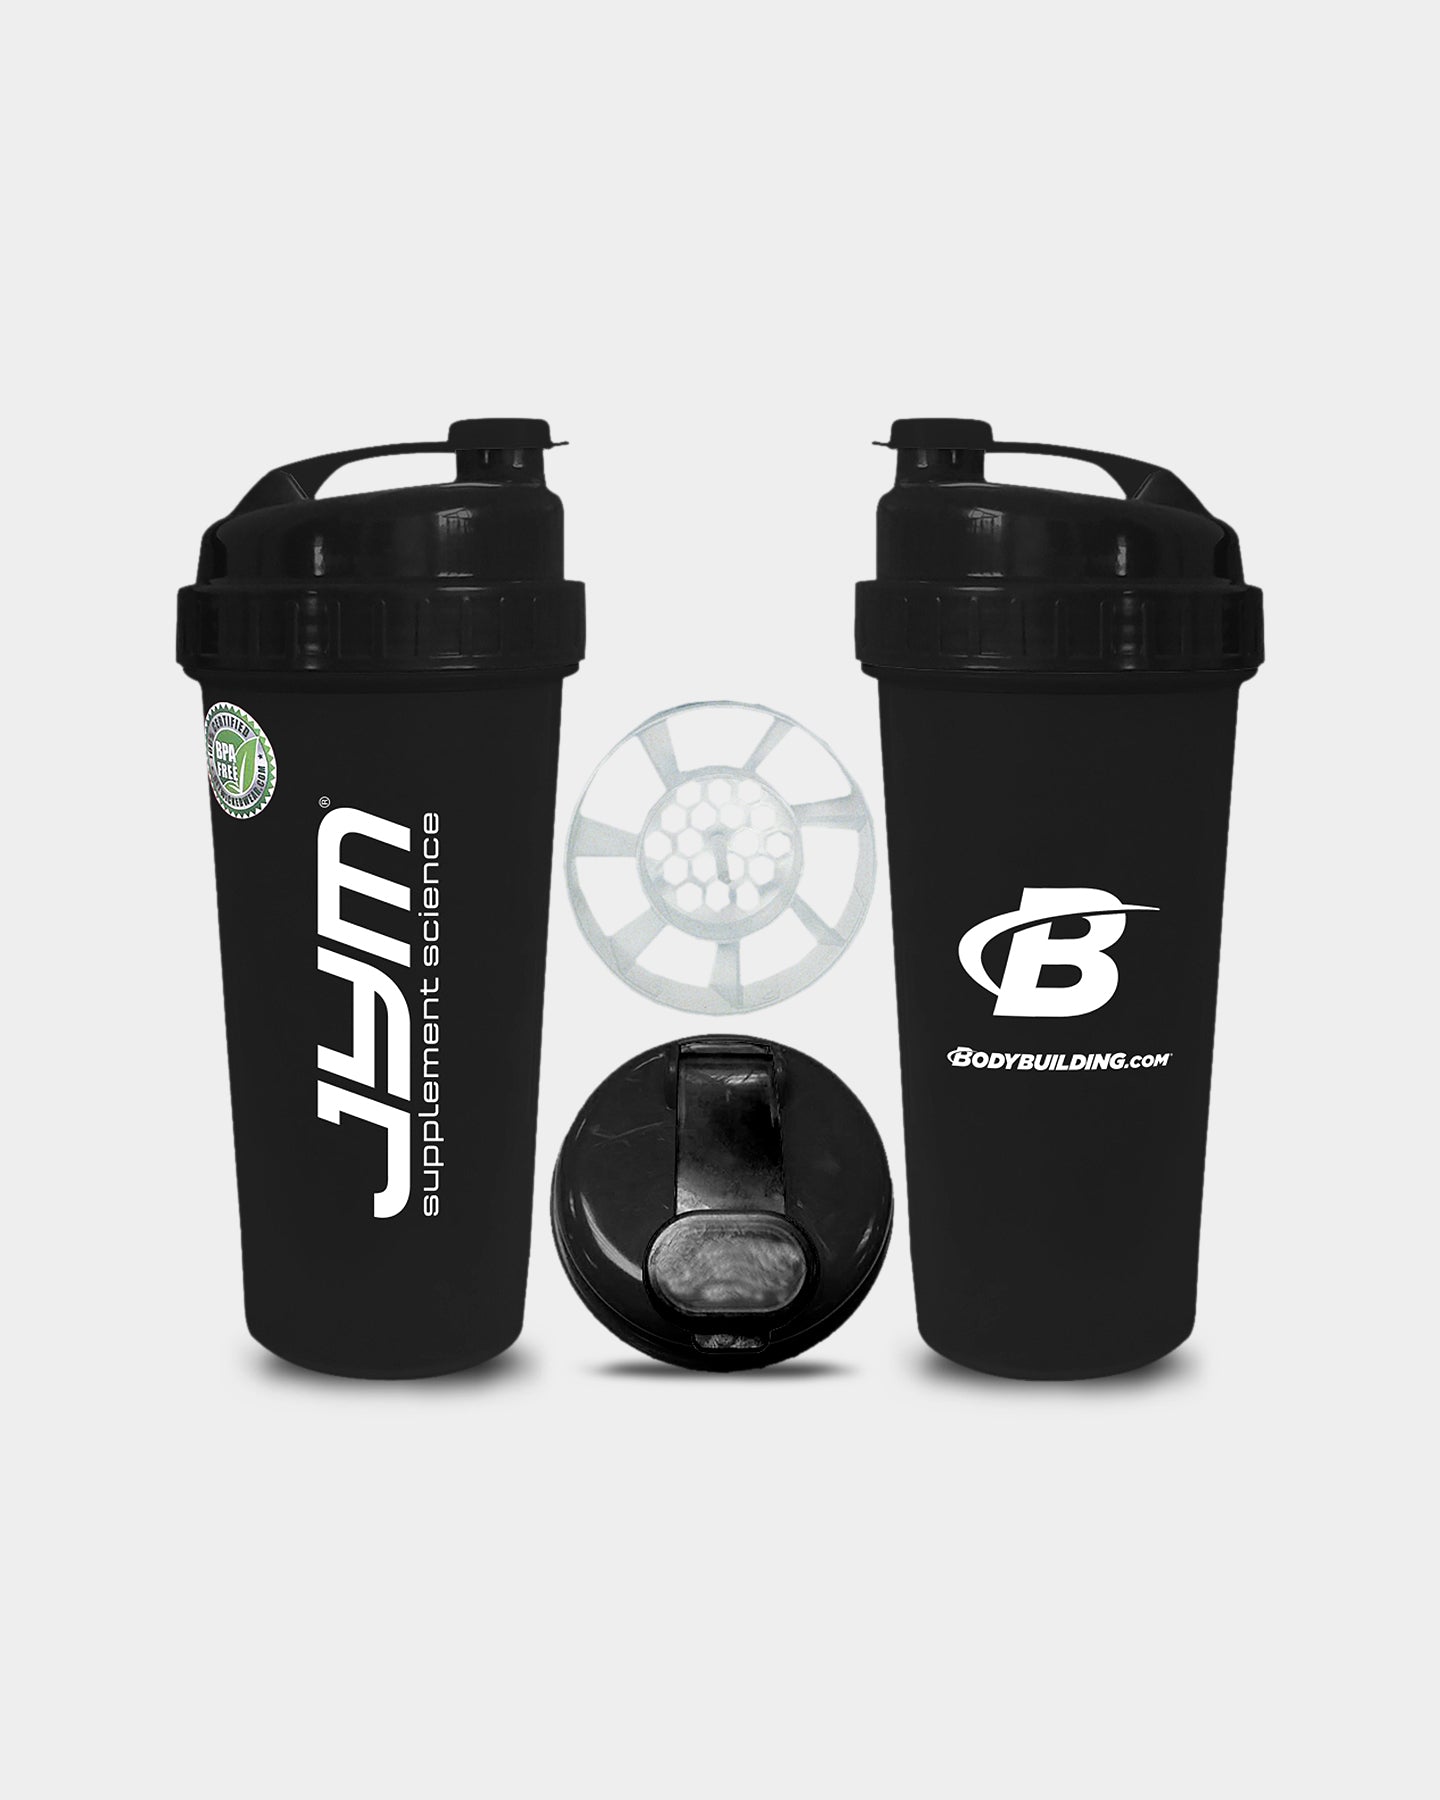 Best Selling Shopify Products on shop.bodybuilding.com-1